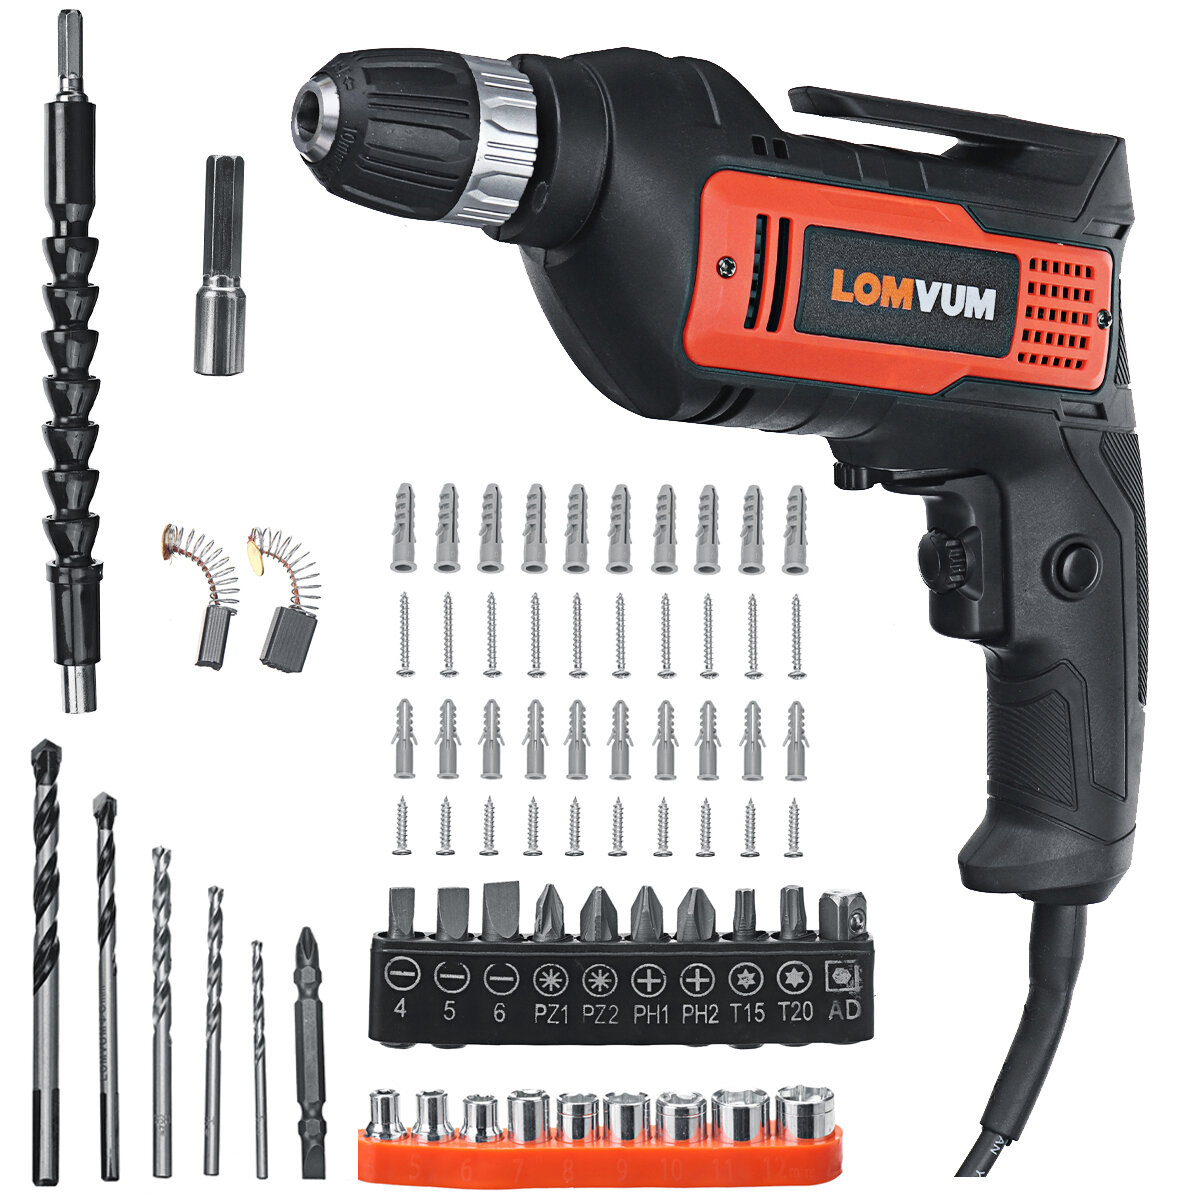 LONGYUN 0-2500R/MIN 220V Multi Functional Electric Hand Drill Driver High Power Household Industrial Grade Drill Electri